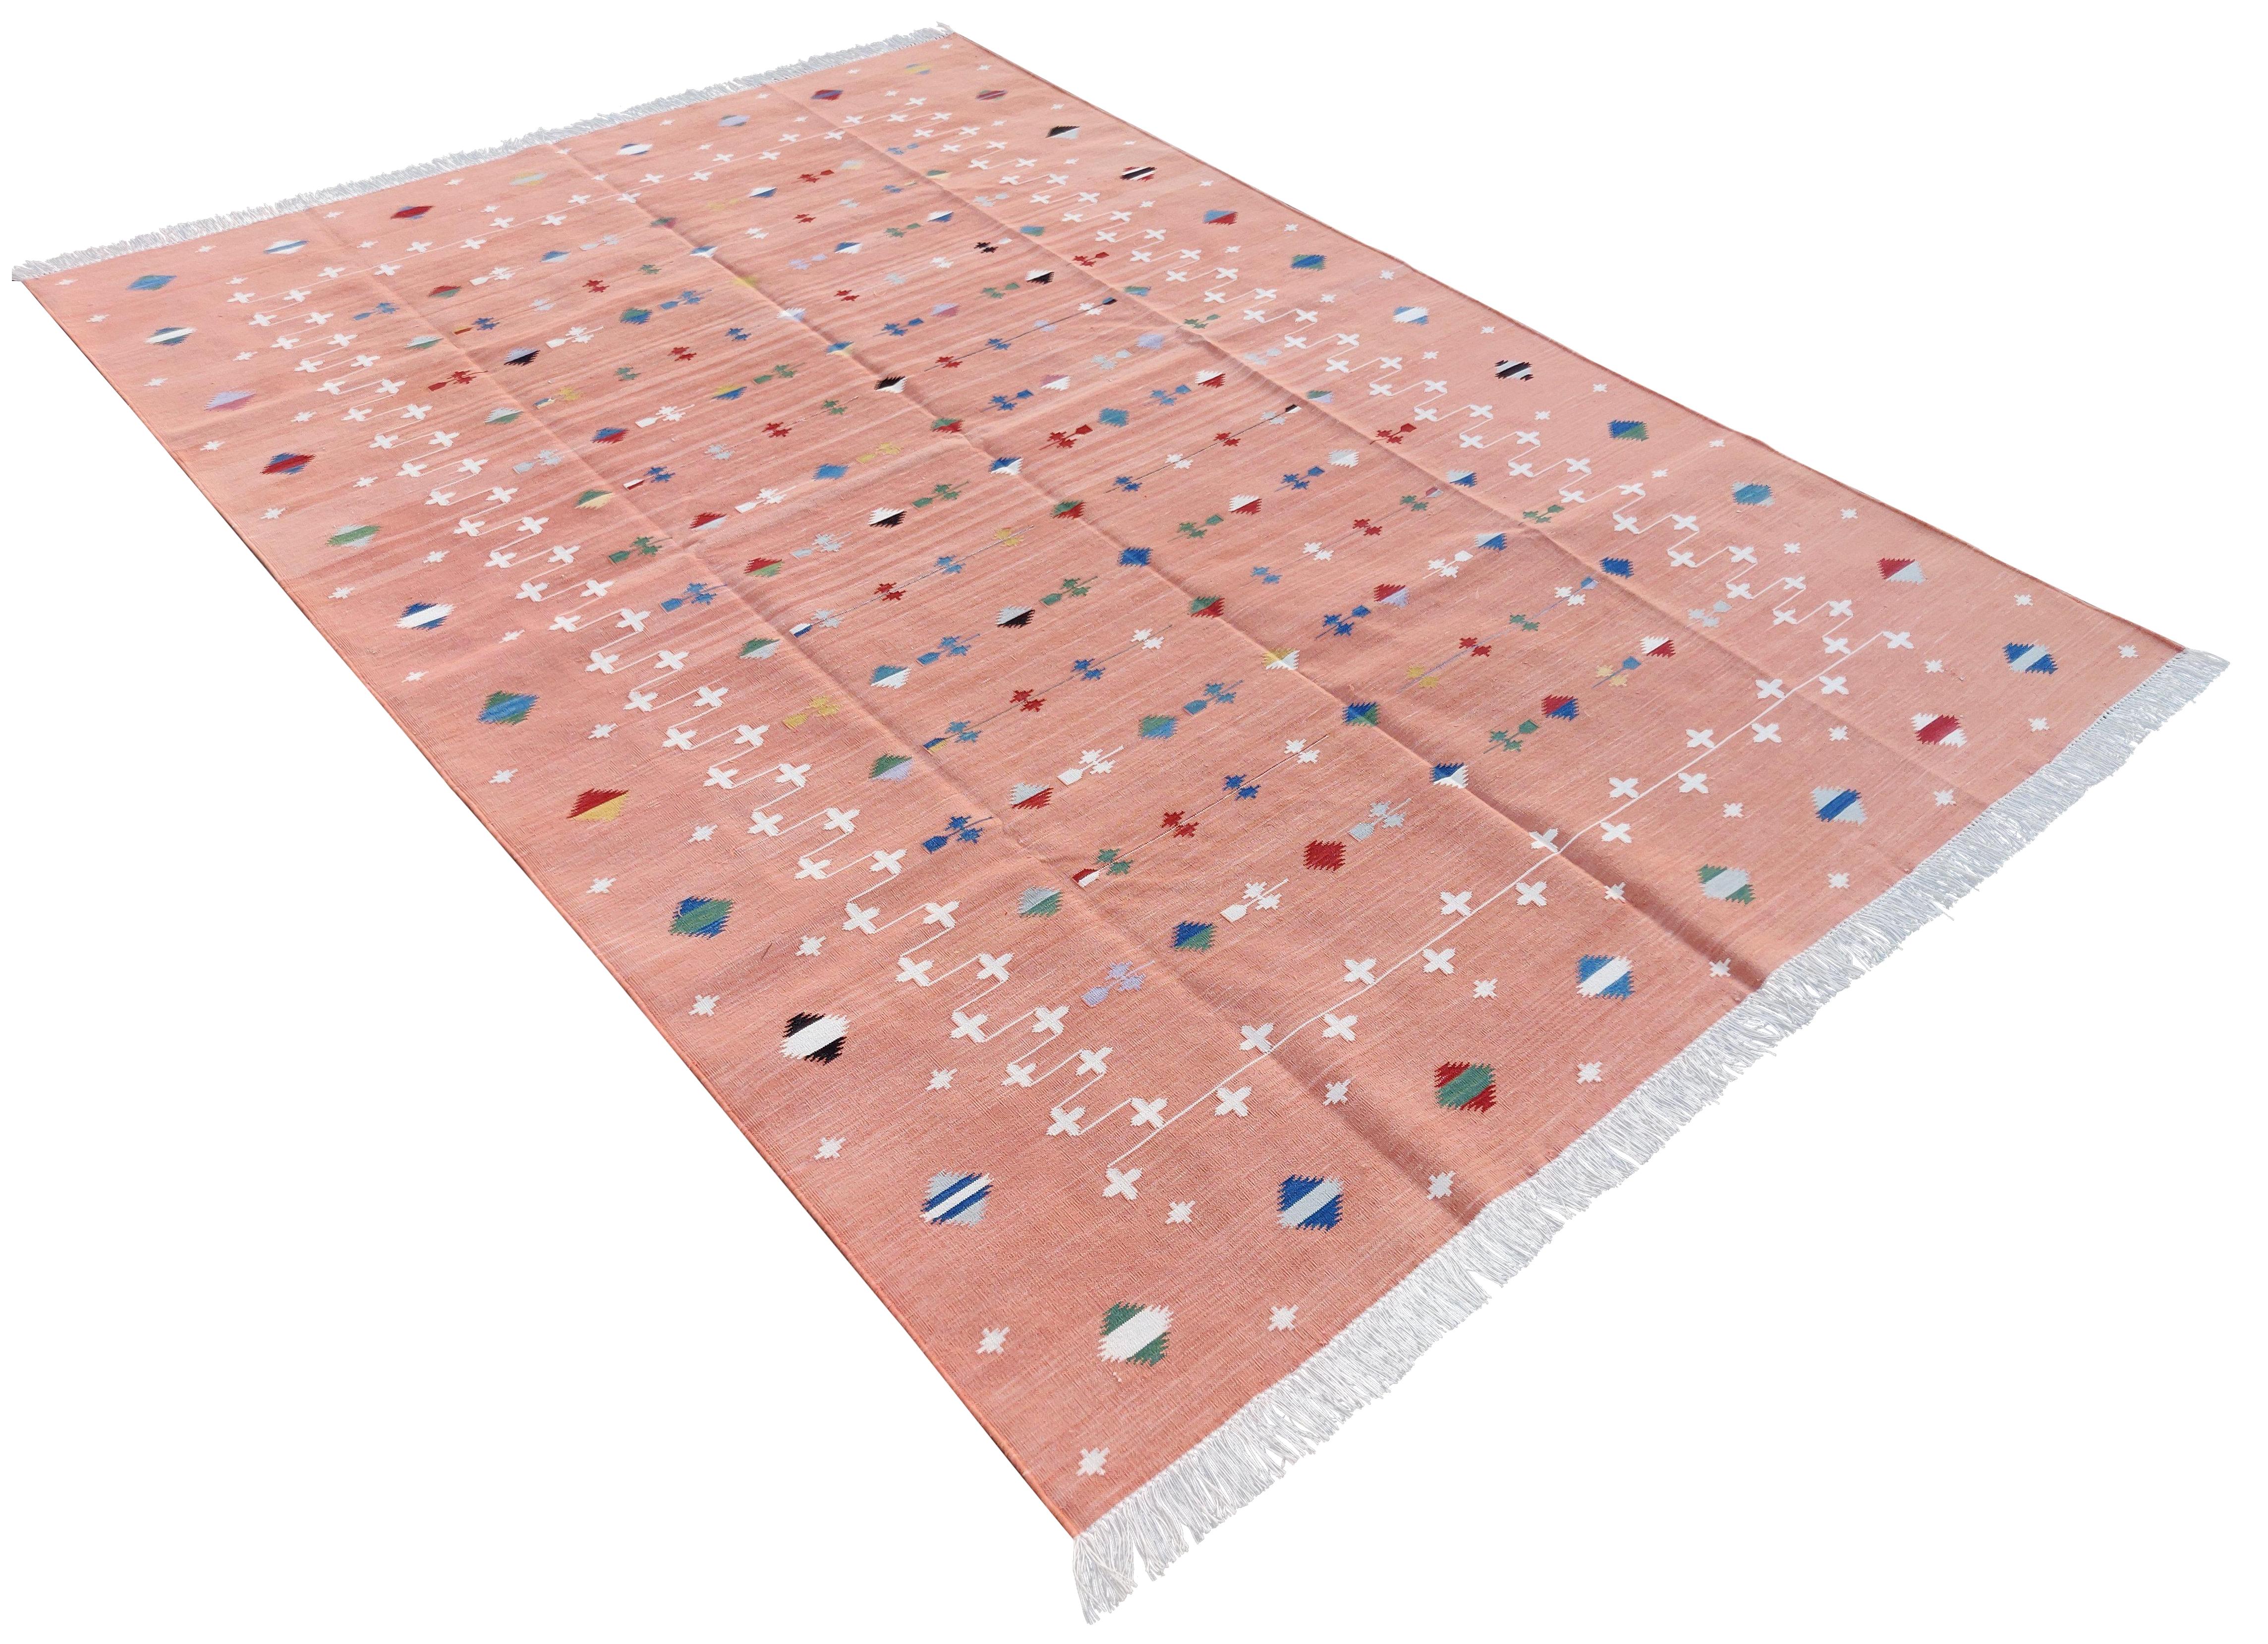 Cotton Vegetable Dyed Reversible Pink And White Indian Shooting Star Rug - 6'x9'
These special flat-weave dhurries are hand-woven with 15 ply 100% cotton yarn. Due to the special manufacturing techniques used to create our rugs, the size and color